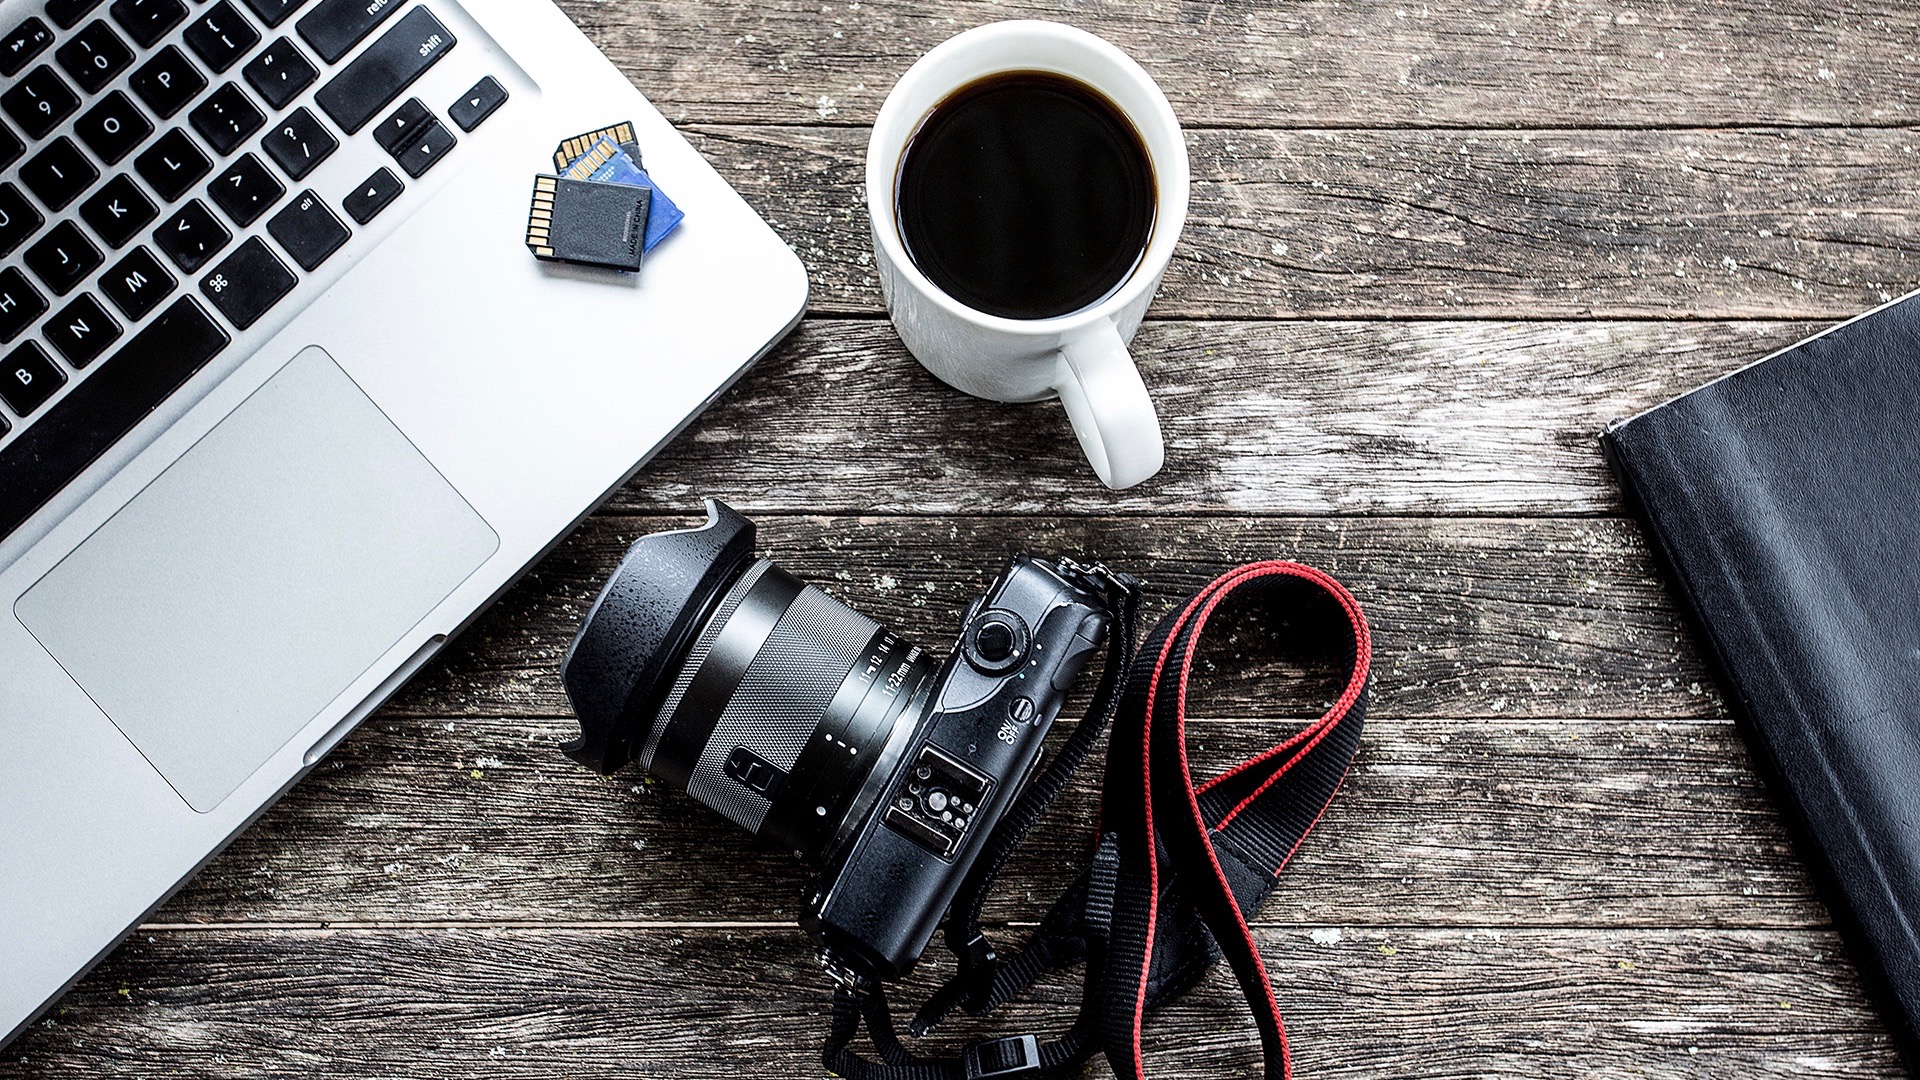 The best photo editing software for photographers in 2019